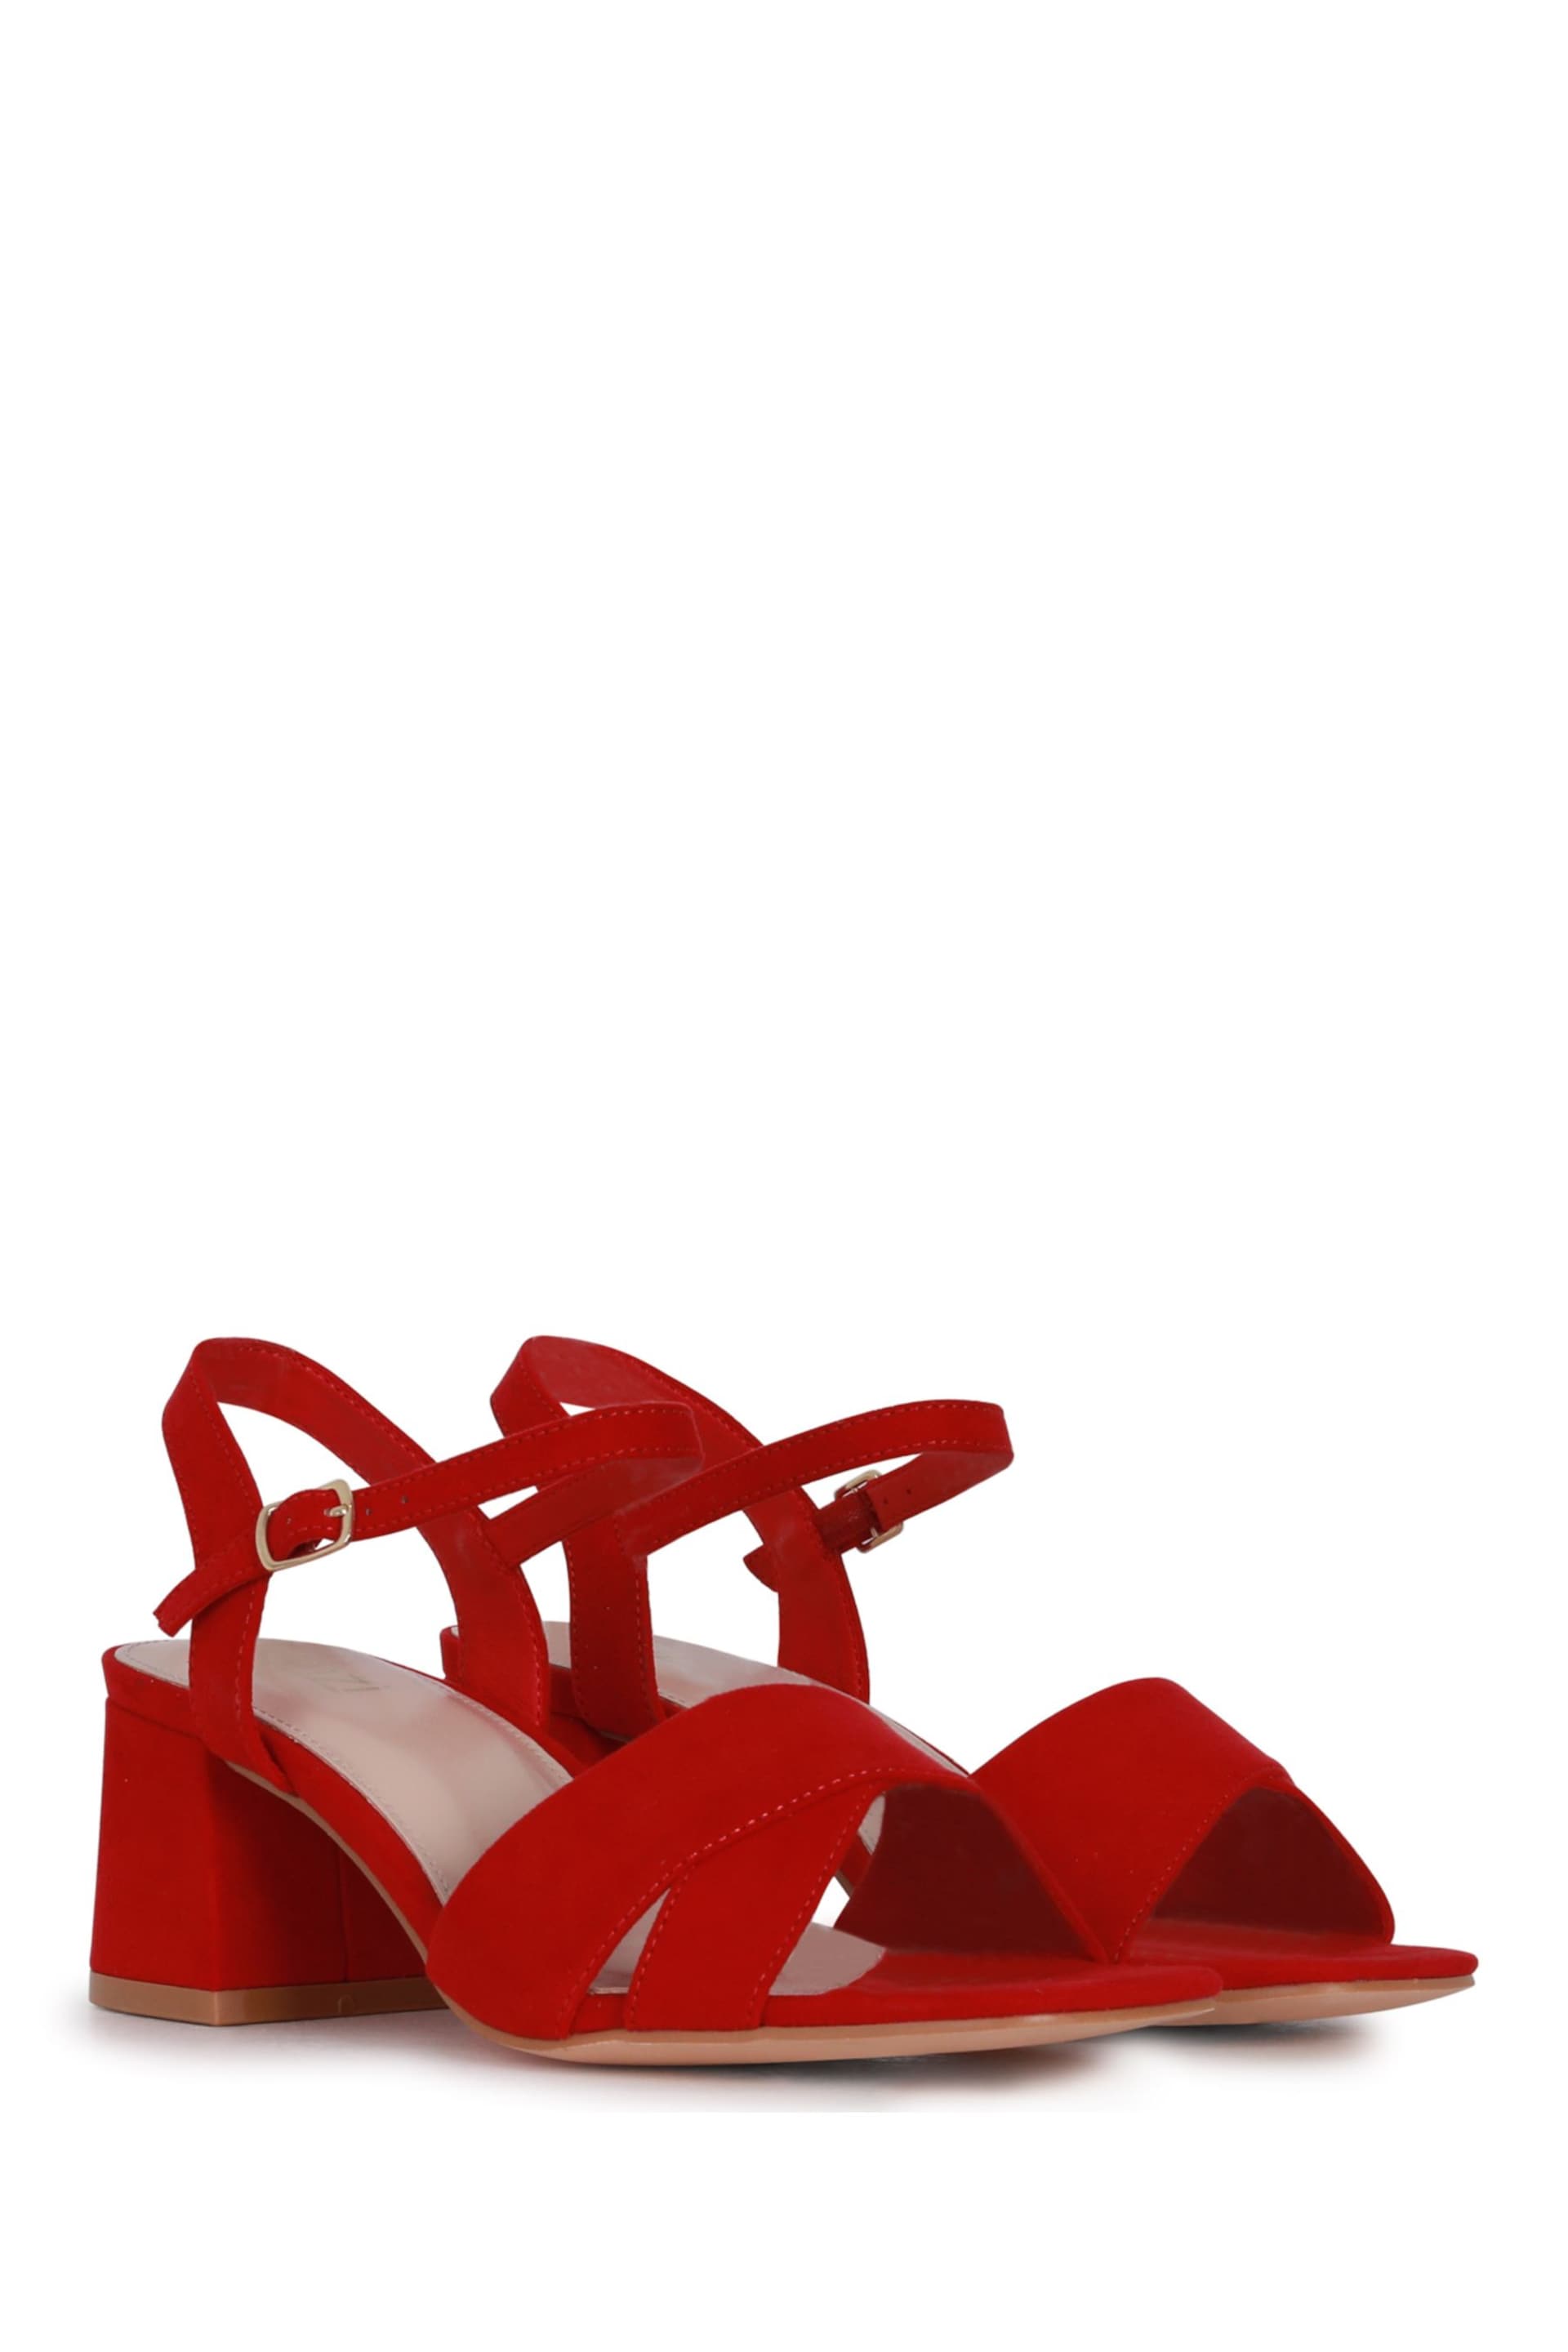 Linzi Red Vivian Wide Fit Heeled Sandals With Crossover Front Strap - Image 3 of 4